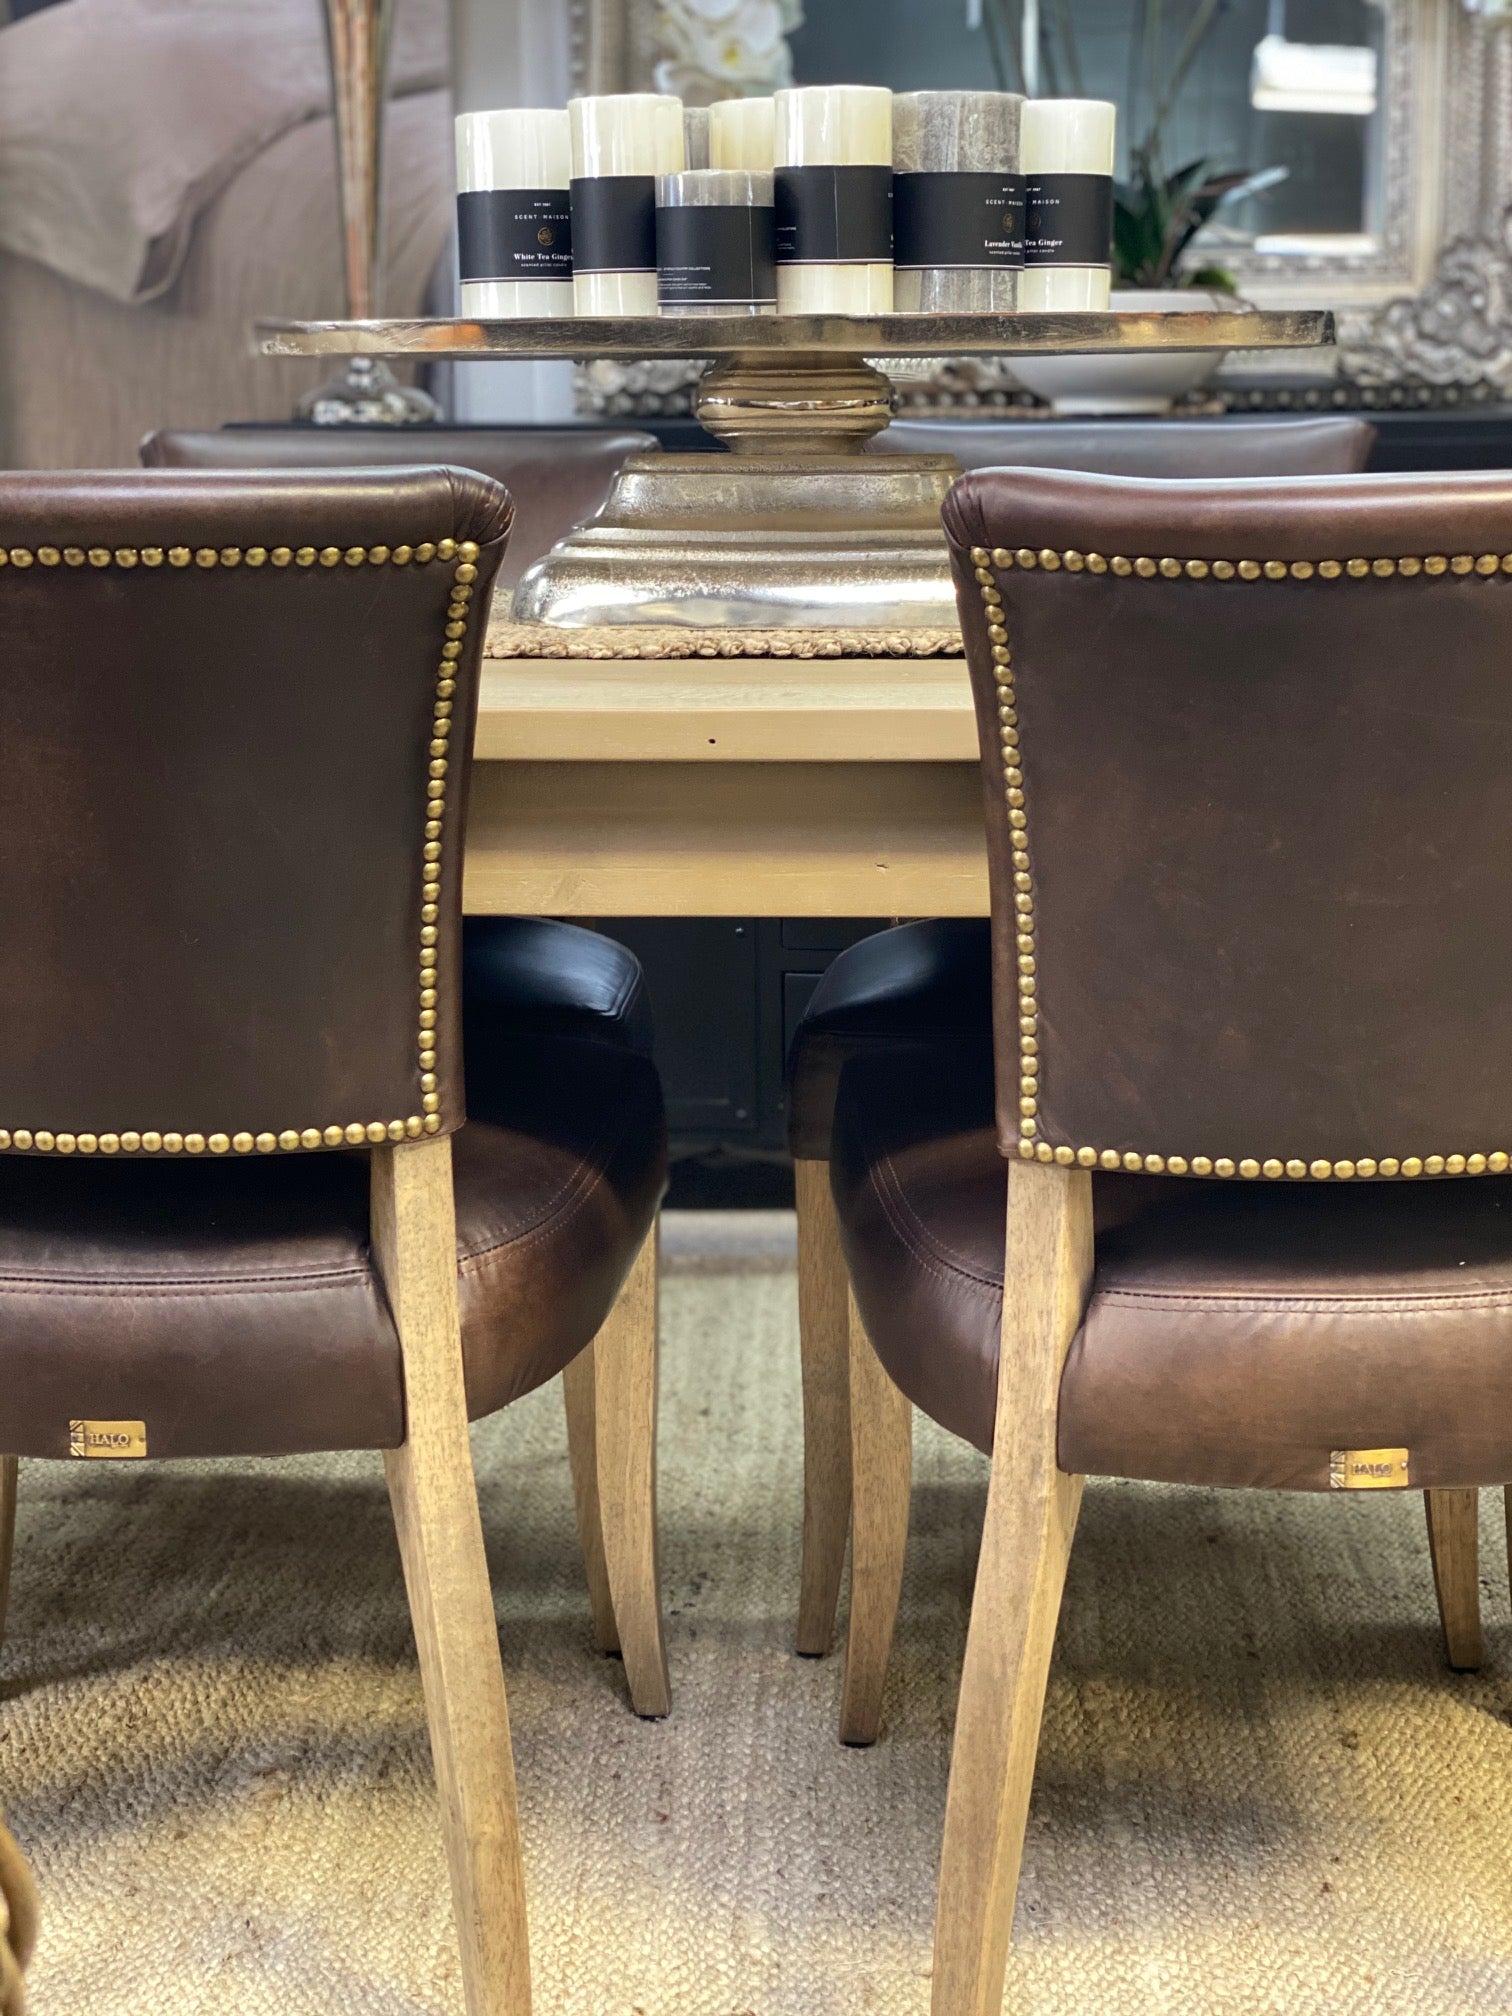 Halo mimi dining chair in antique tobacco leather